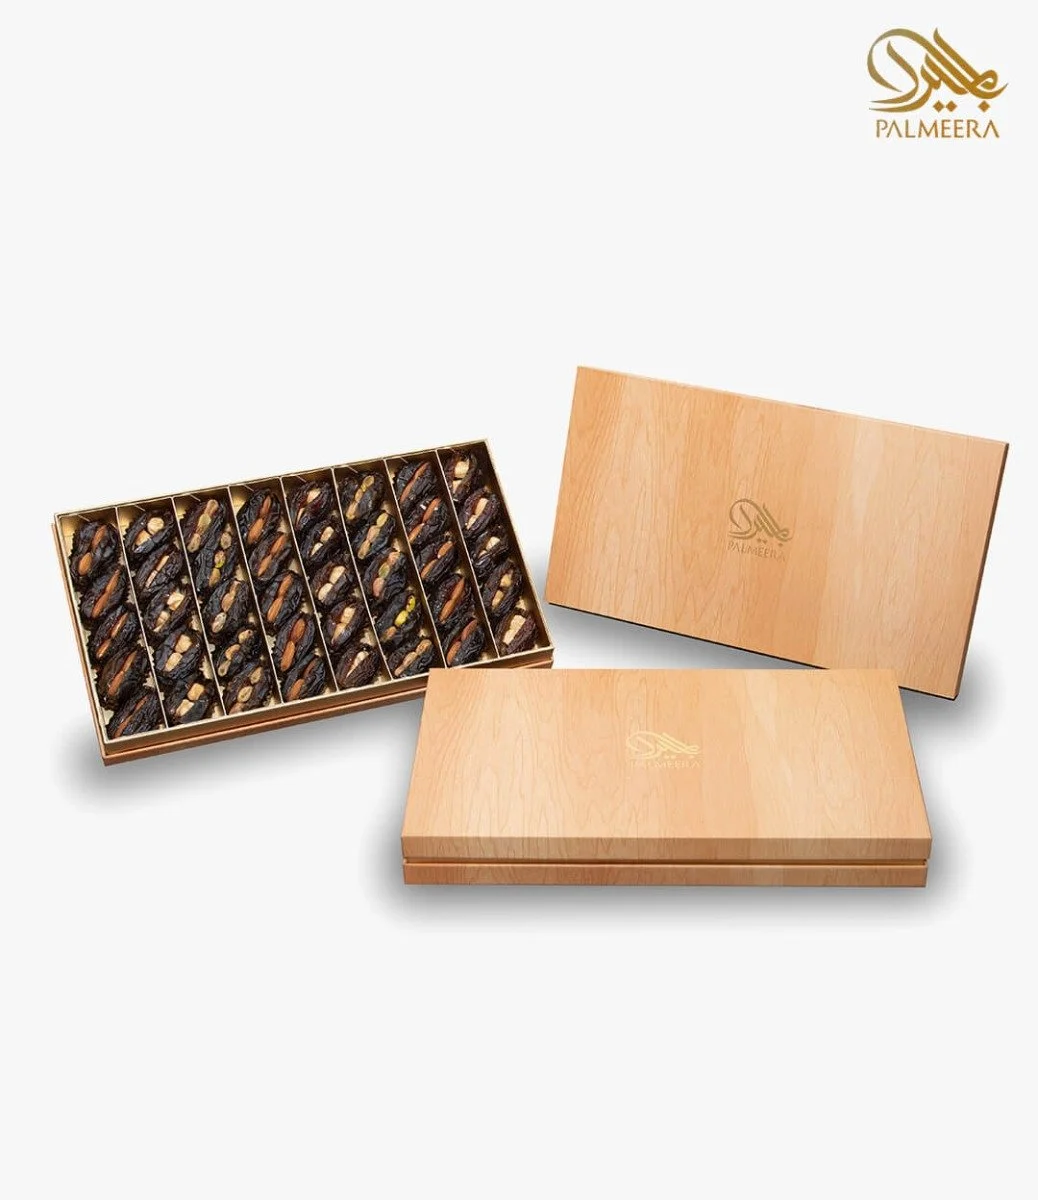 Big Size Carton Box With Wood Grains Dates Stuffed with Nuts By Palmeera